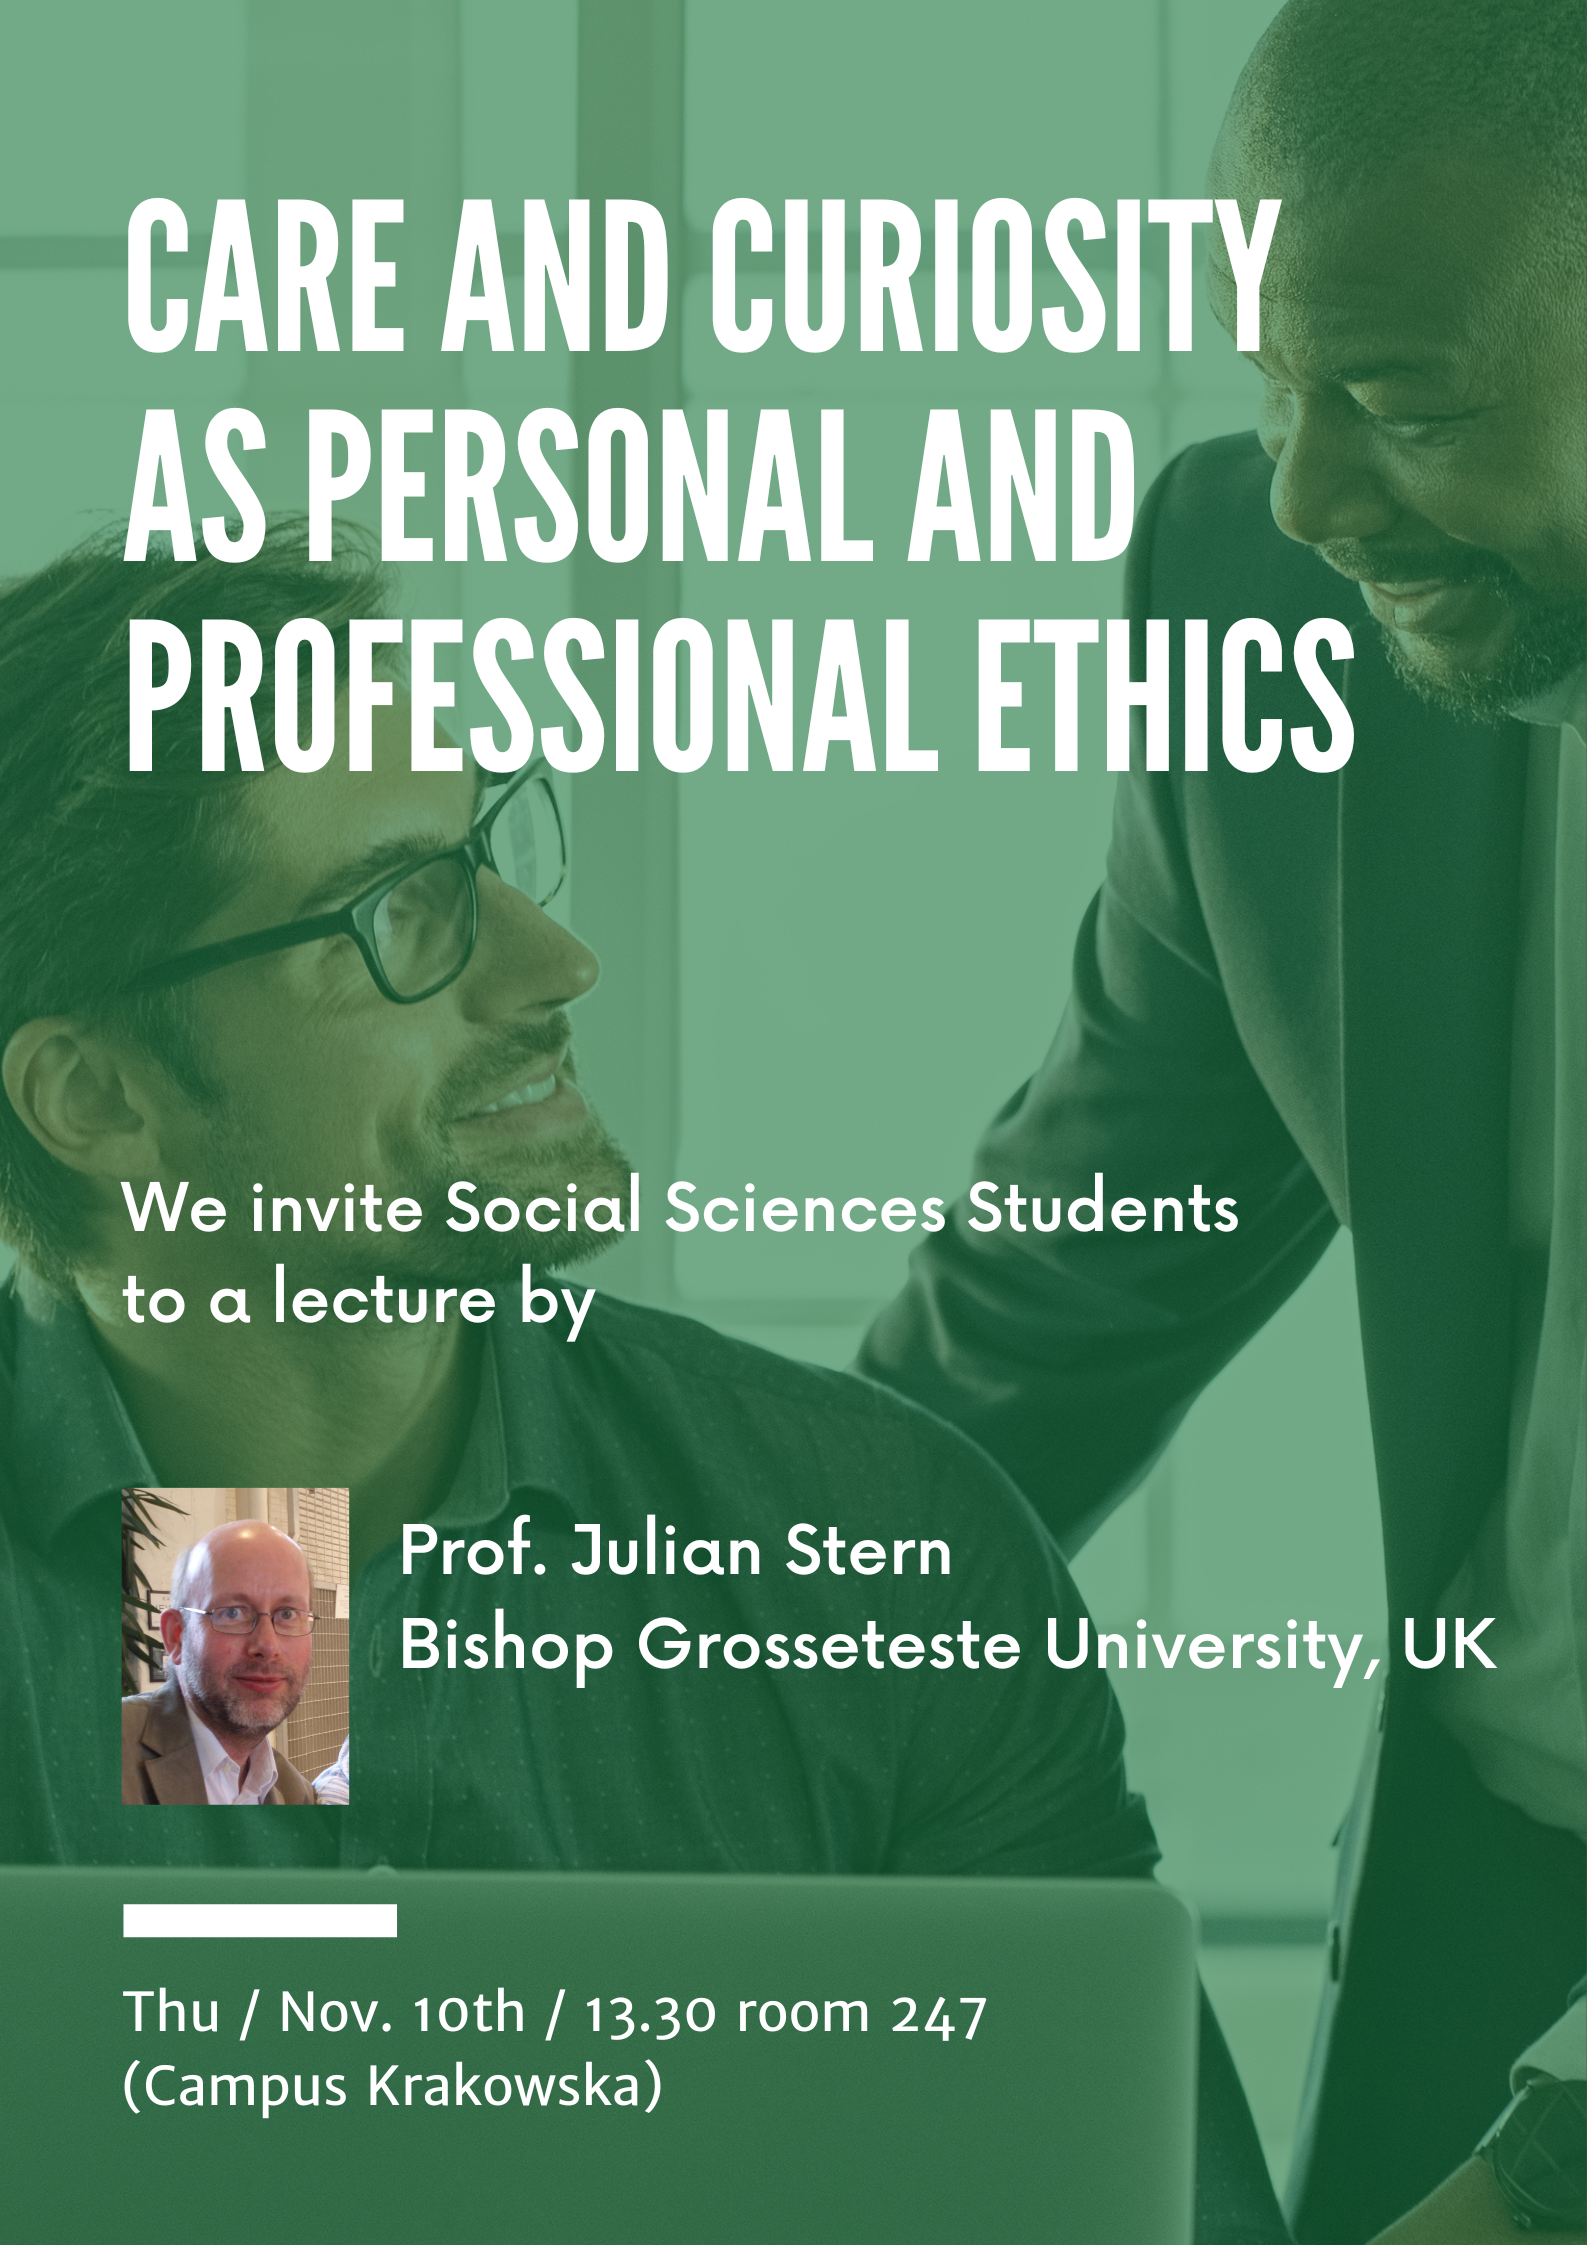 Lecture by Prof. Julian Stern (Bishop Grosseteste University, UK) on Care and Curiosity as Personal and Professional Ethics